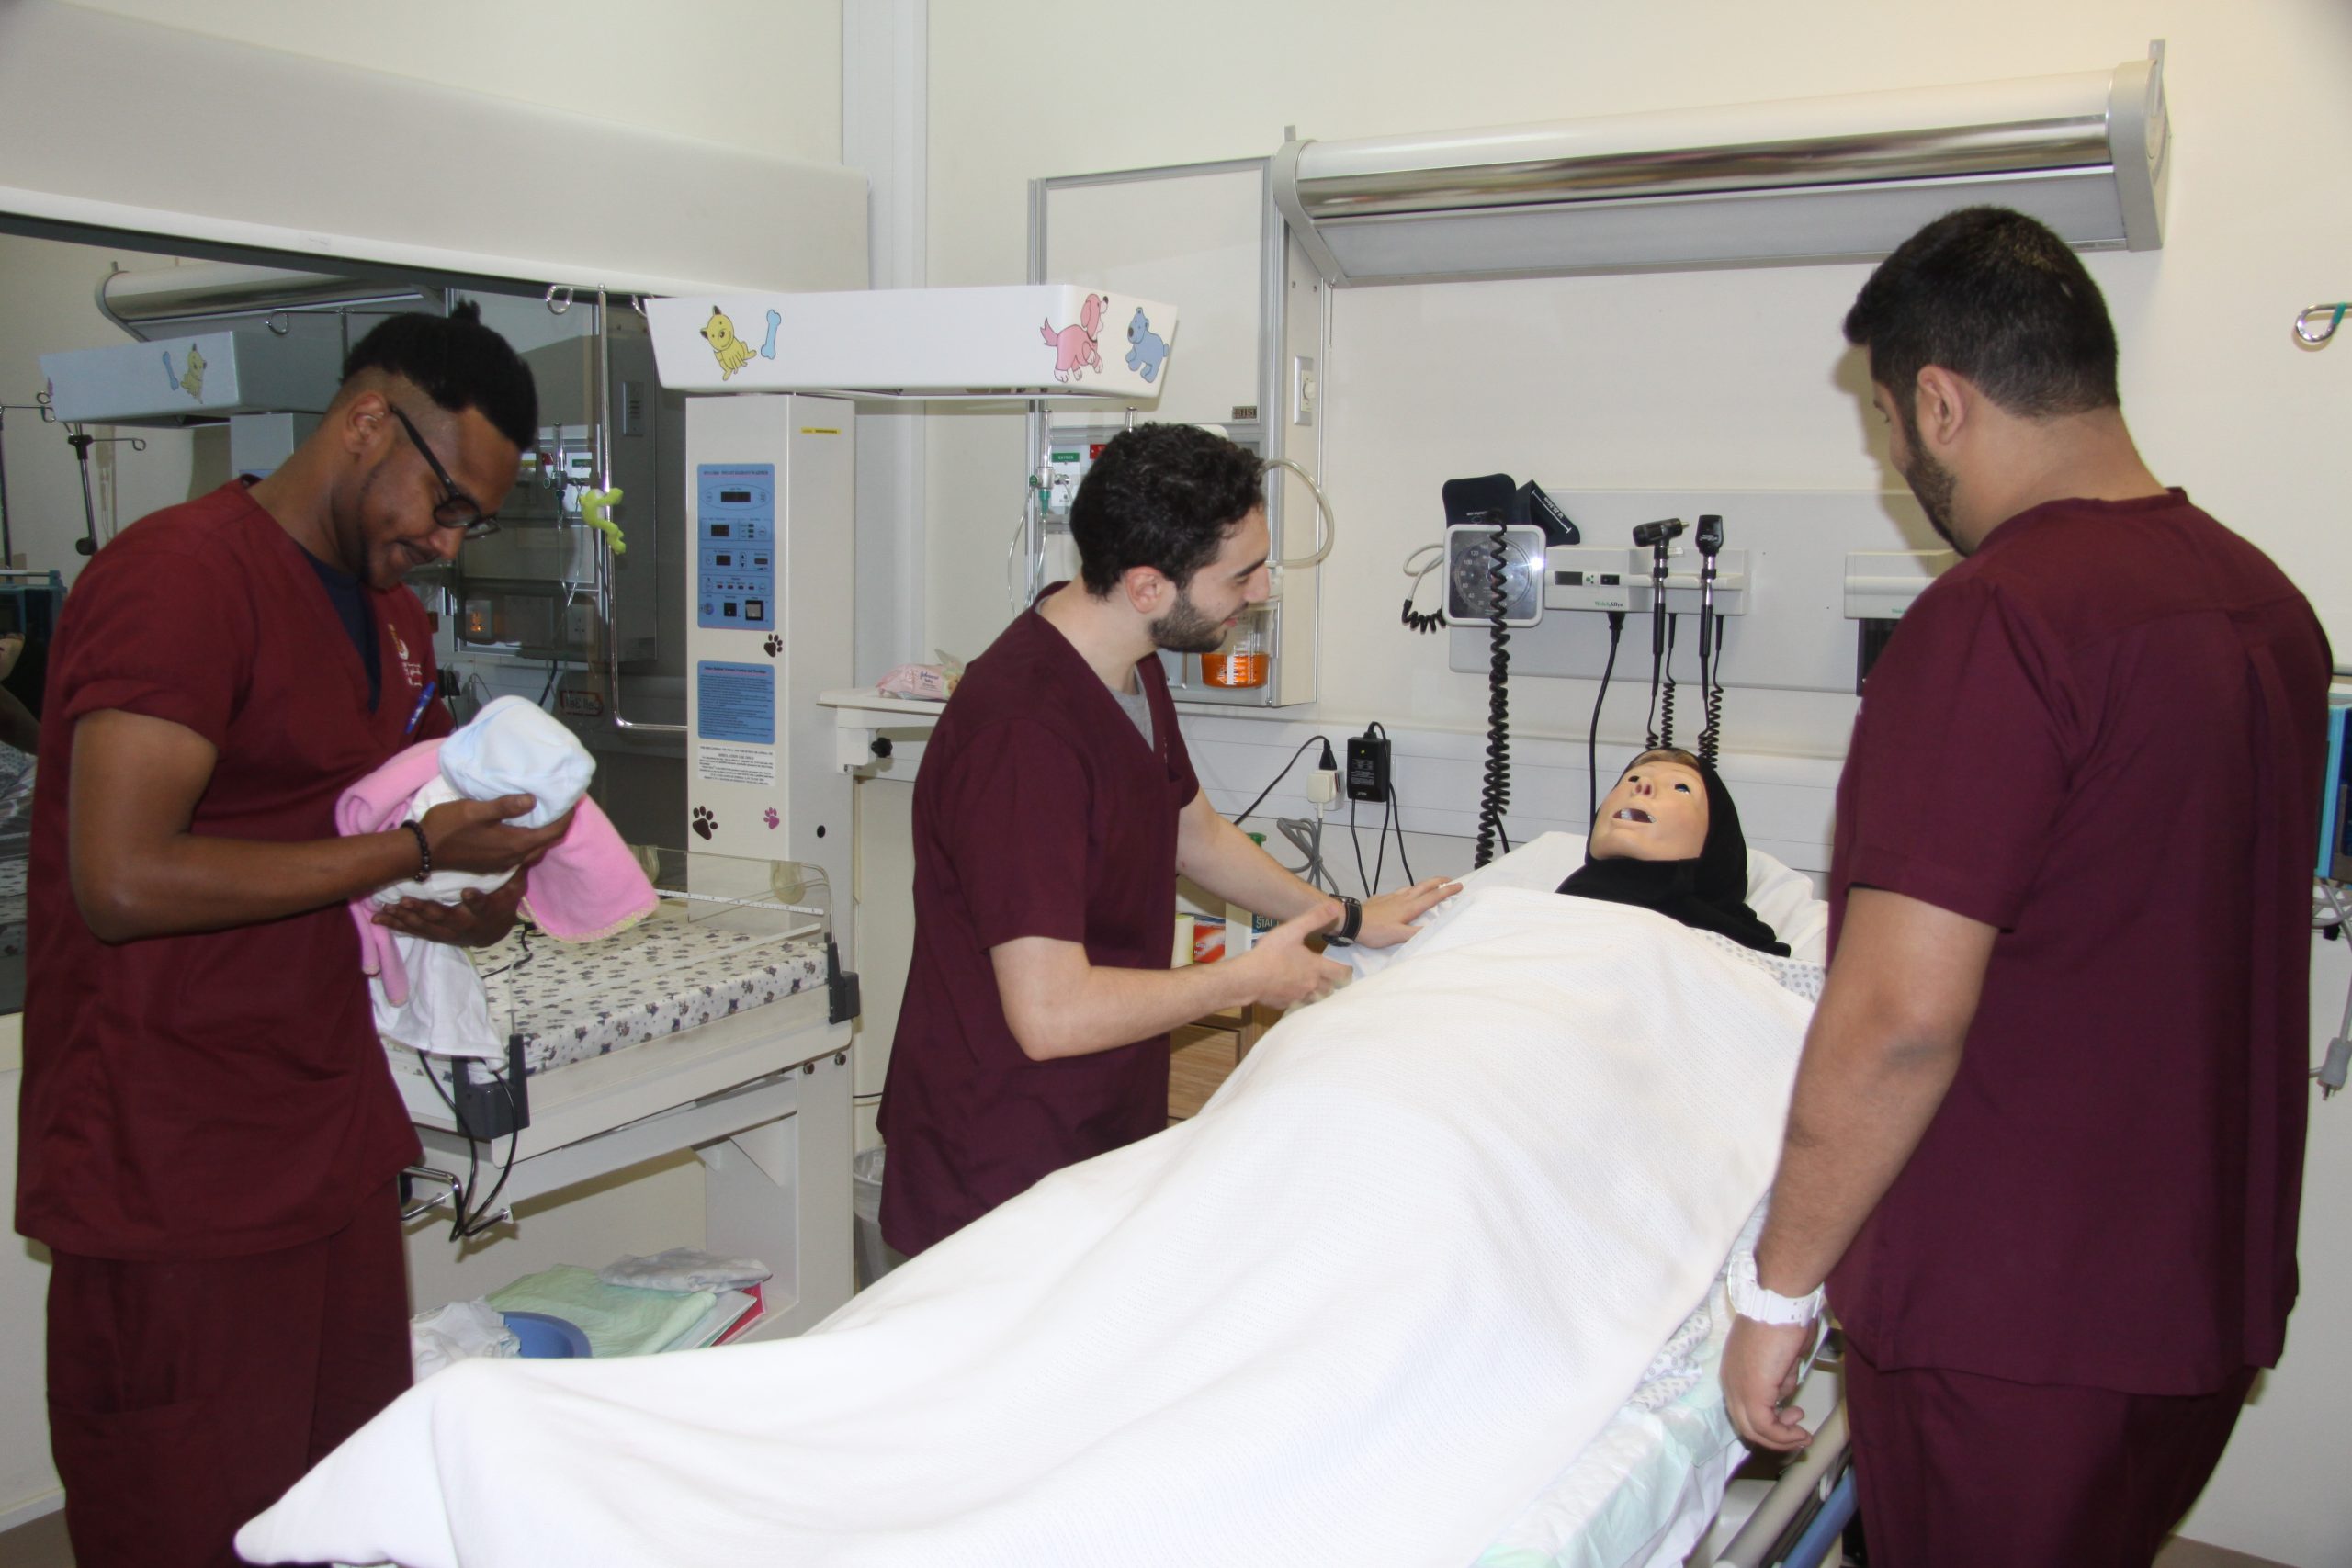 <strong>Simulation in Doha? The Experiential Learning Center</strong>